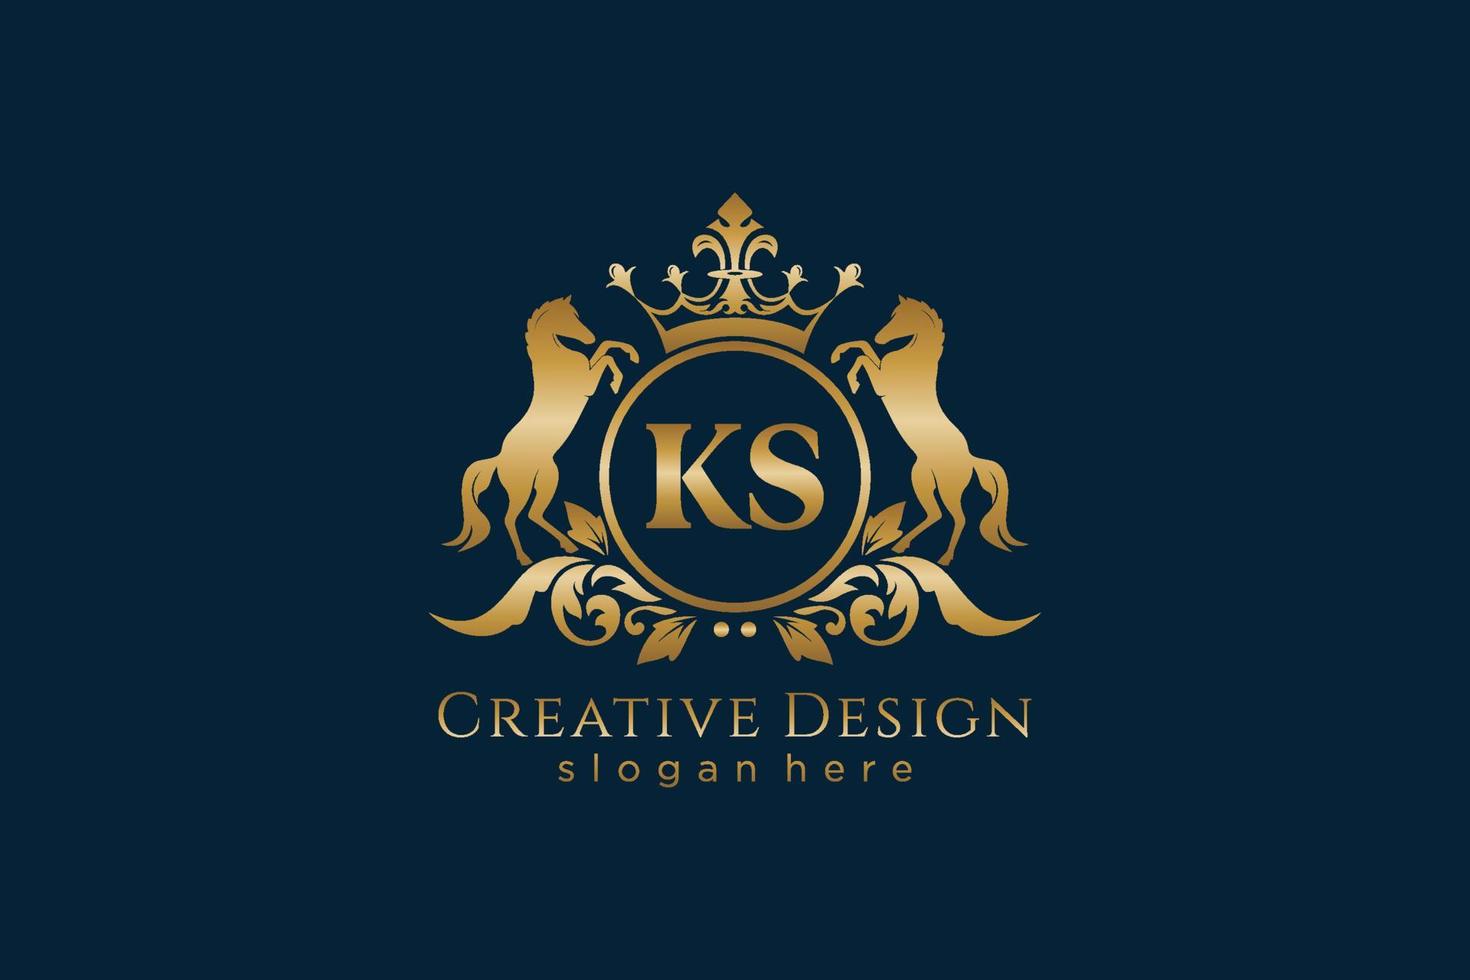 initial KS Retro golden crest with circle and two horses, badge template with scrolls and royal crown - perfect for luxurious branding projects vector